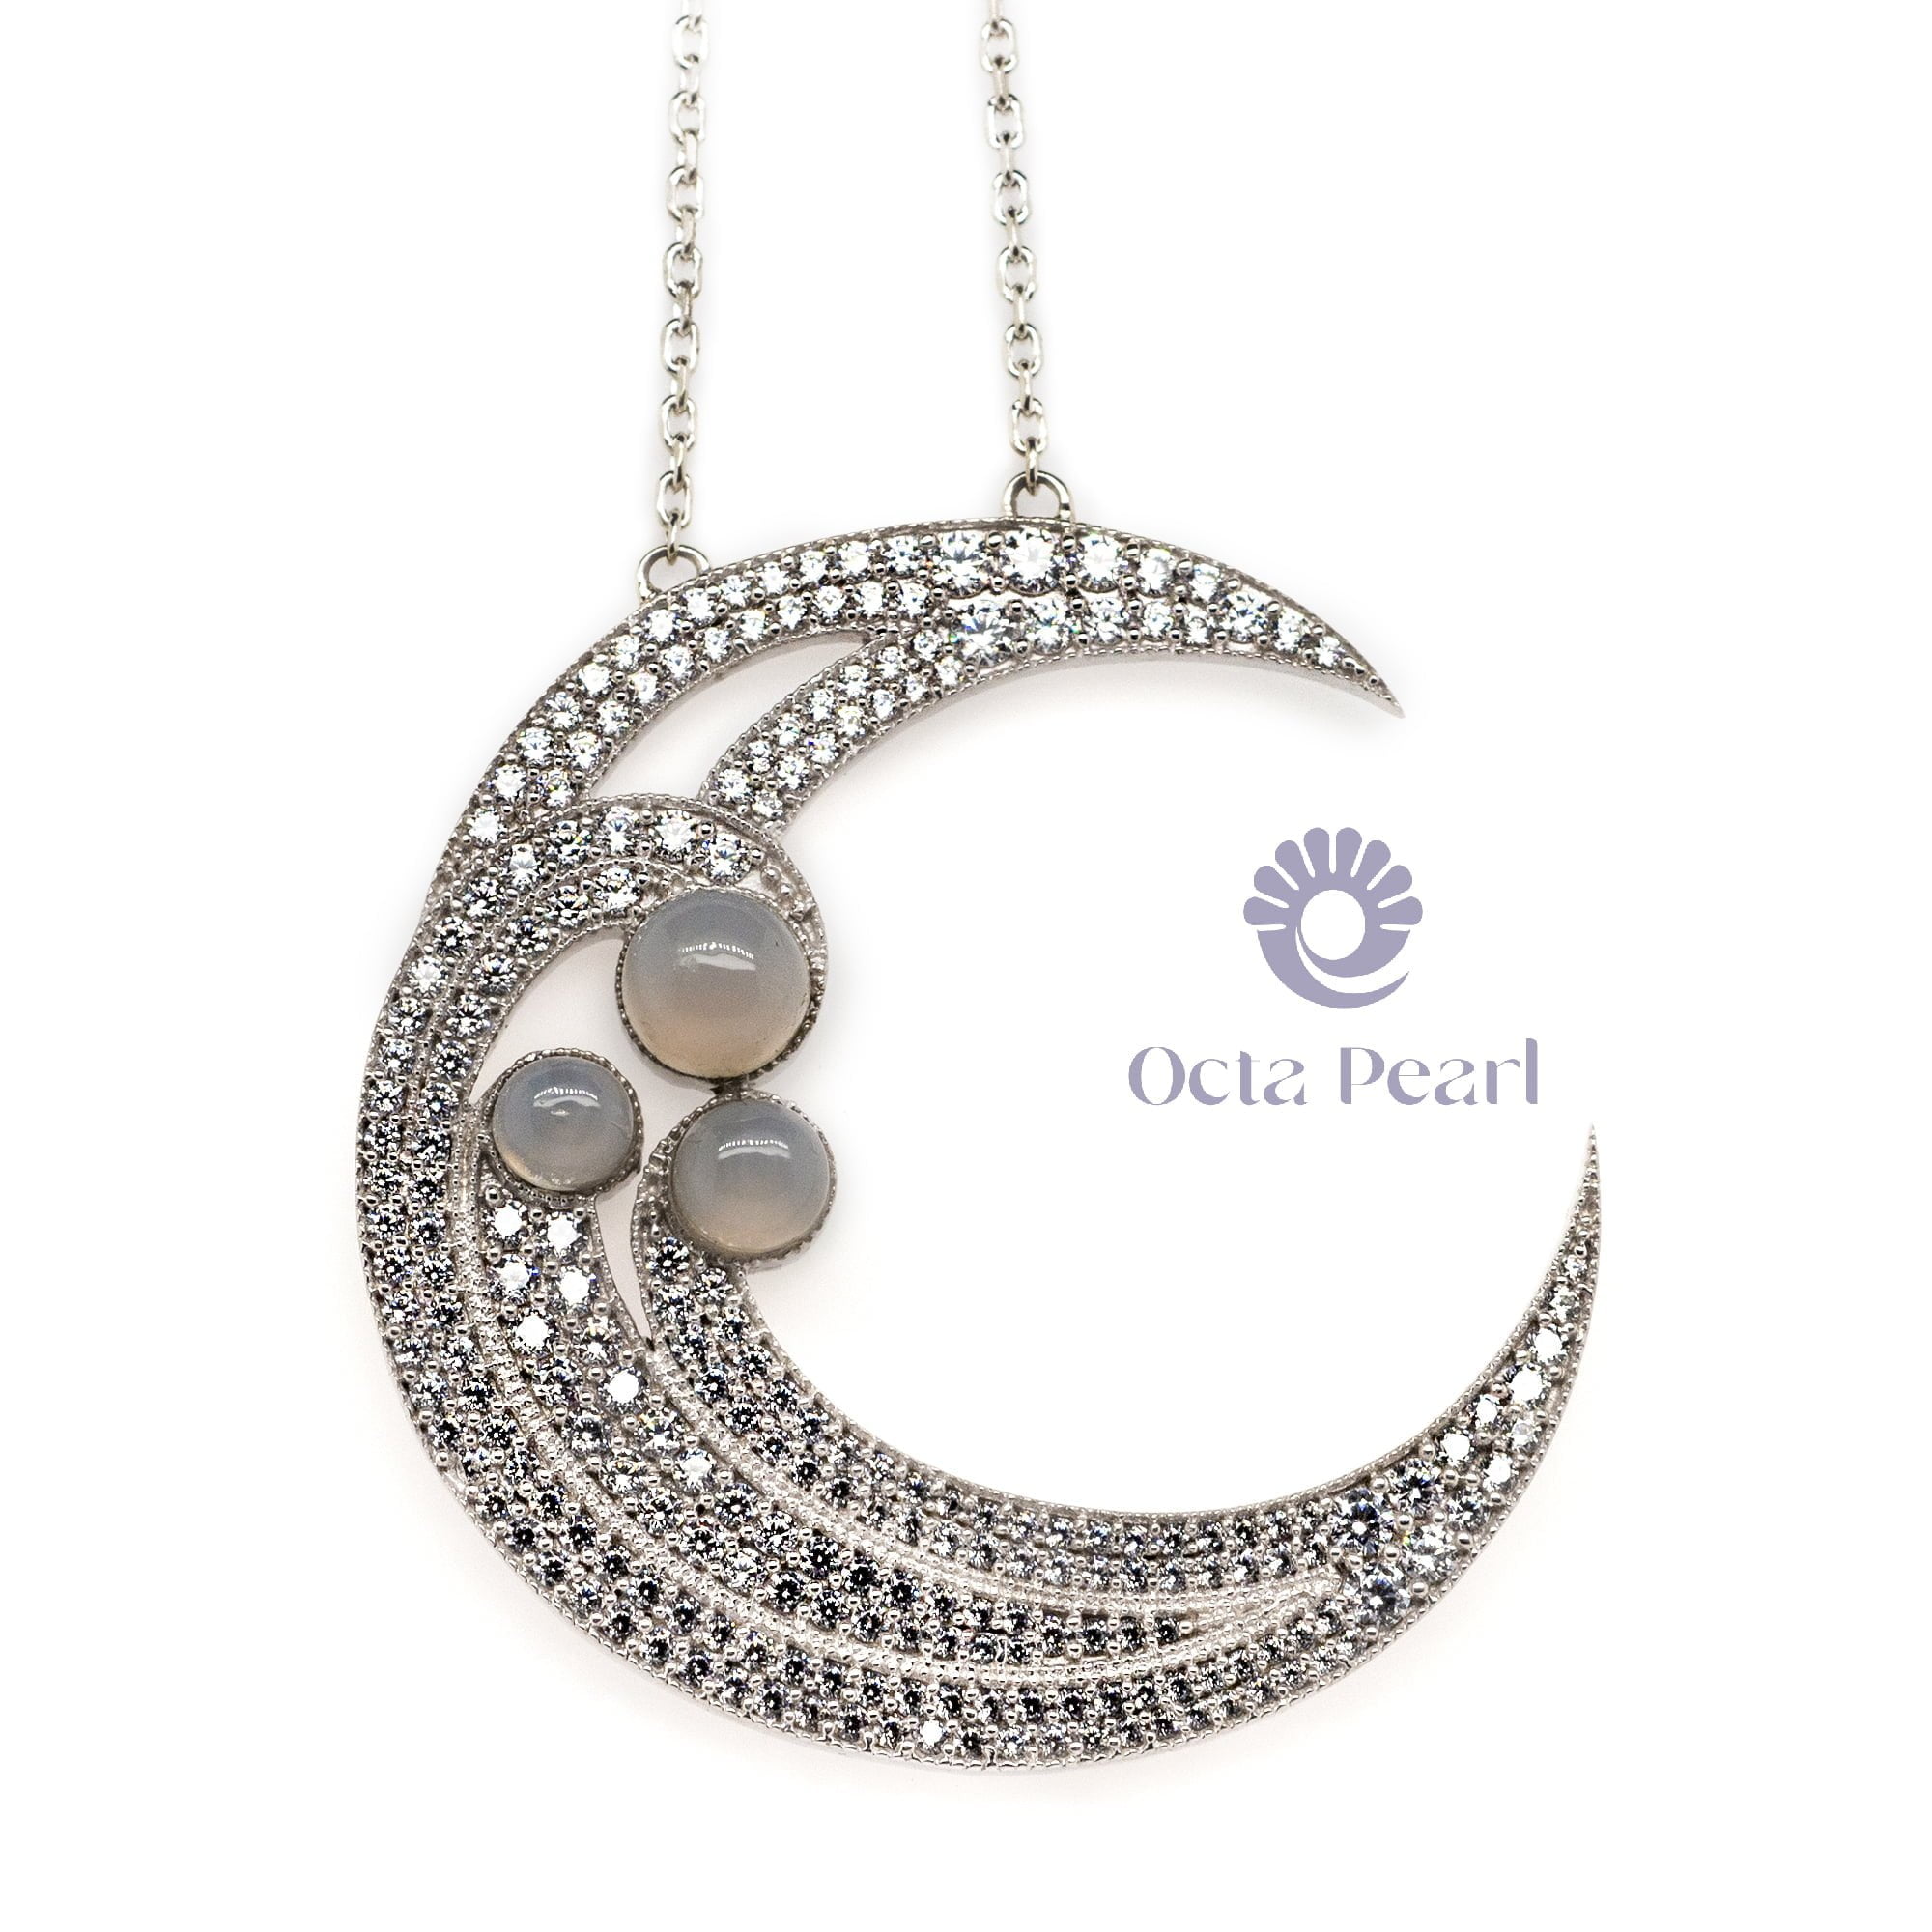 Fancy 3 Half Cabochon With CZ Round Stone Pave Set Beautiful Half Moon Chain Pendant Necklace For Women